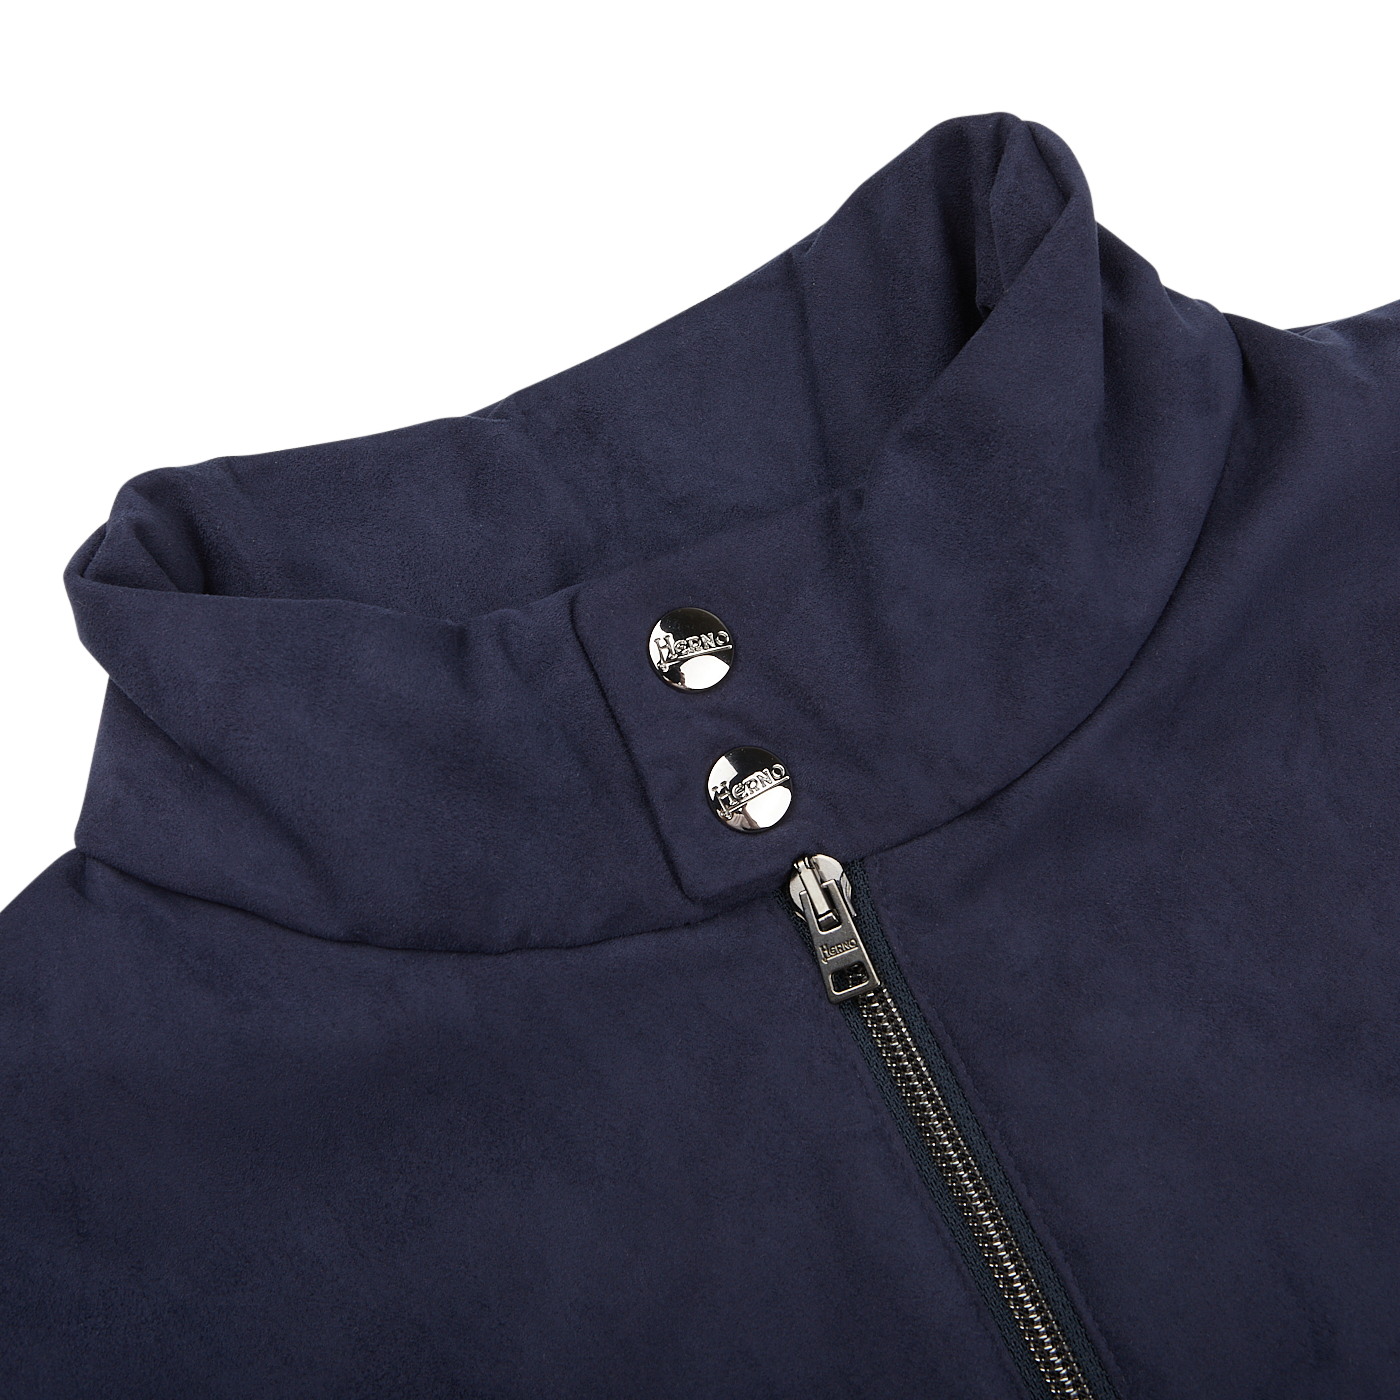 Close-up of a Herno Navy Blue Suede Alcantara Zip Gilet collar featuring two silver snap buttons and a zipper. The fabric, resembling Alcantara, appears soft with a smooth texture visible.